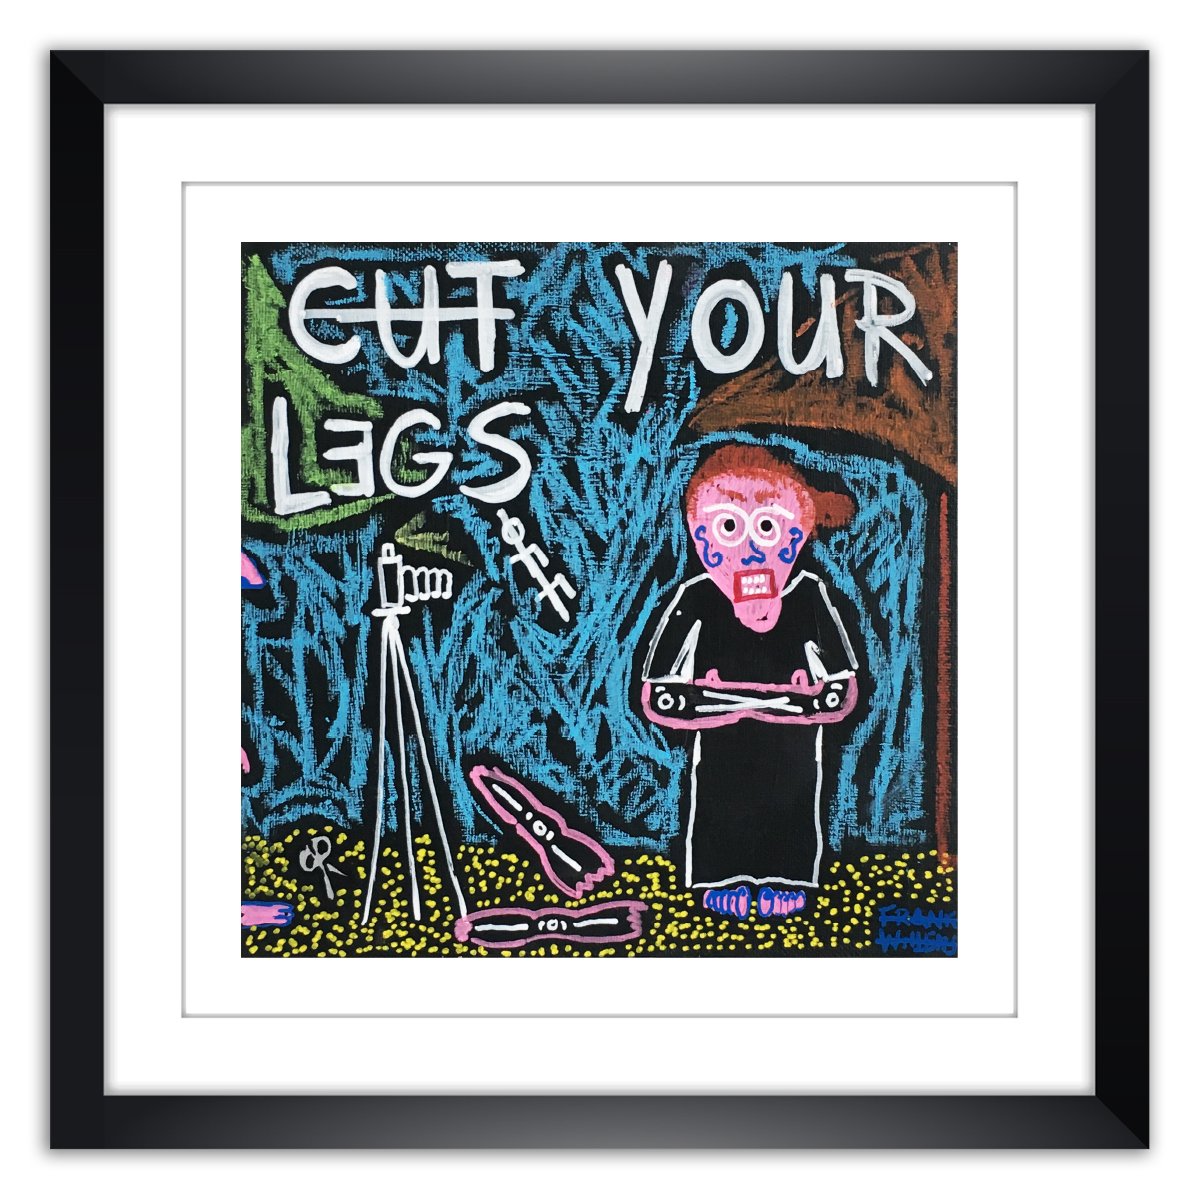 Limited prints - CUT YOUR LEGS OFF framed - Frank Willems